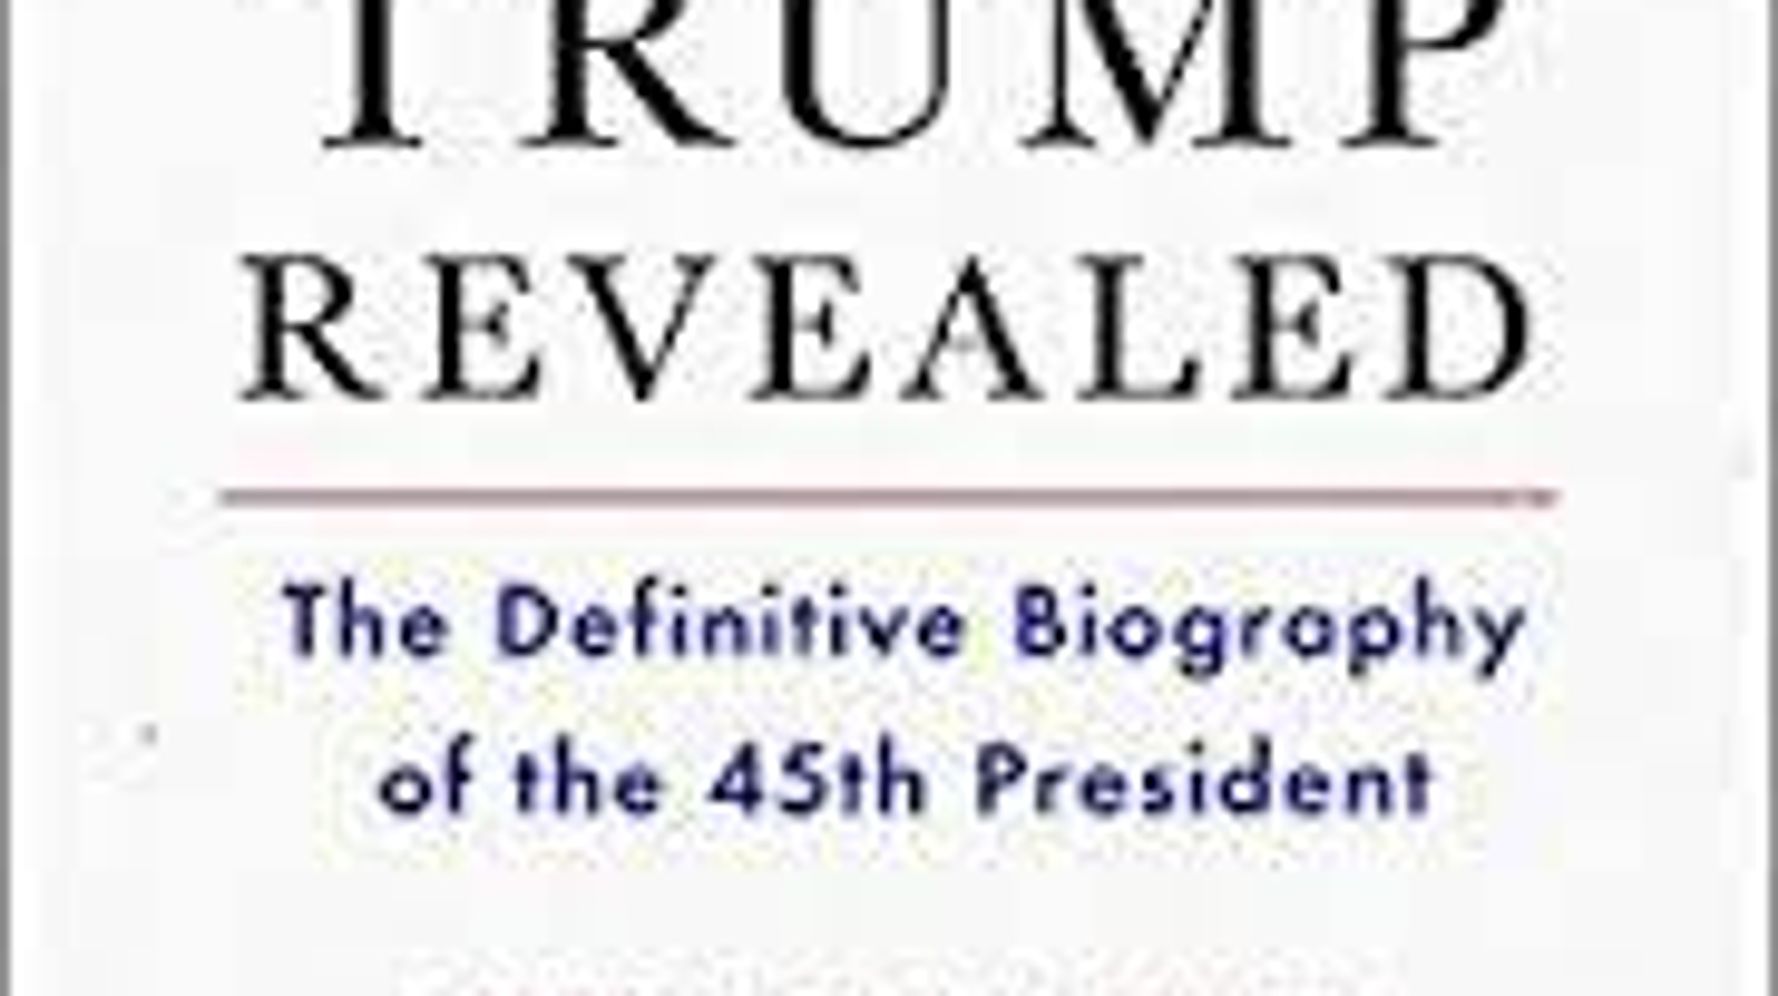 Trump Revealed The Definitive Biography of the 45th President Epub-Ebook